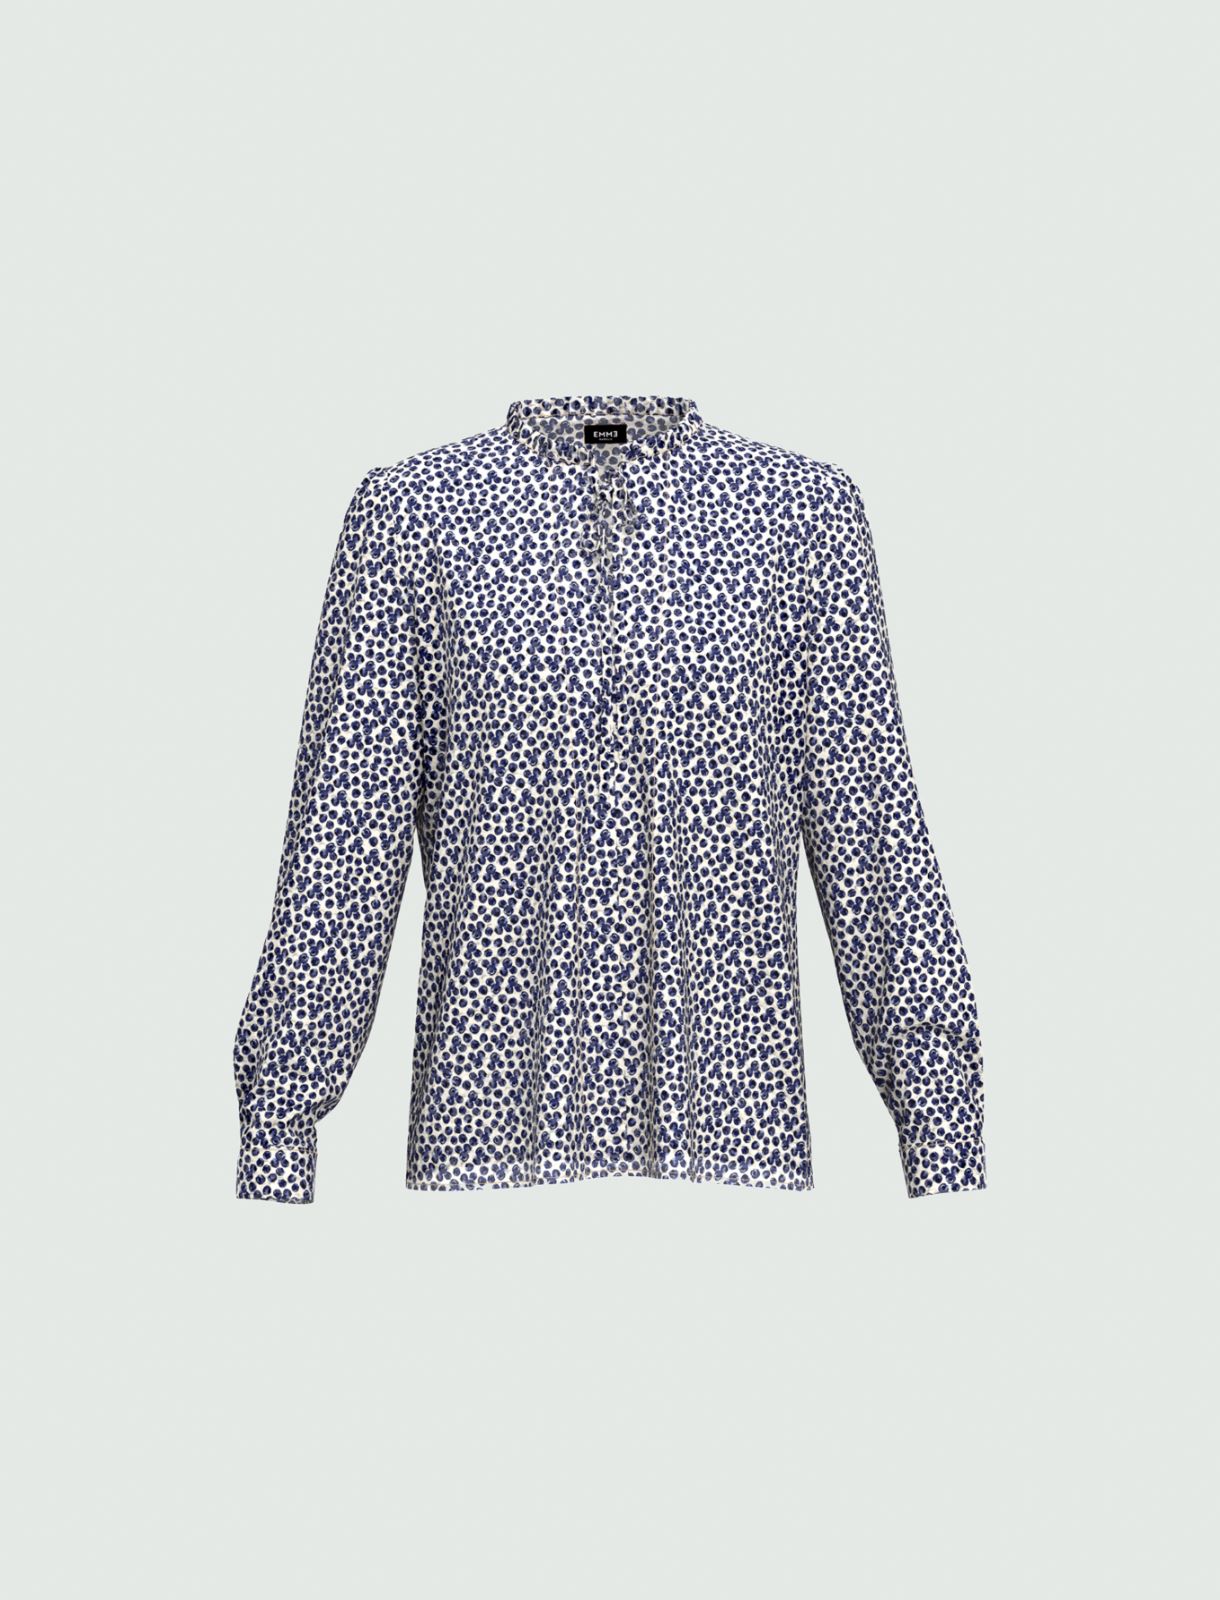 Dotted Swiss blouse - Navy - Persona